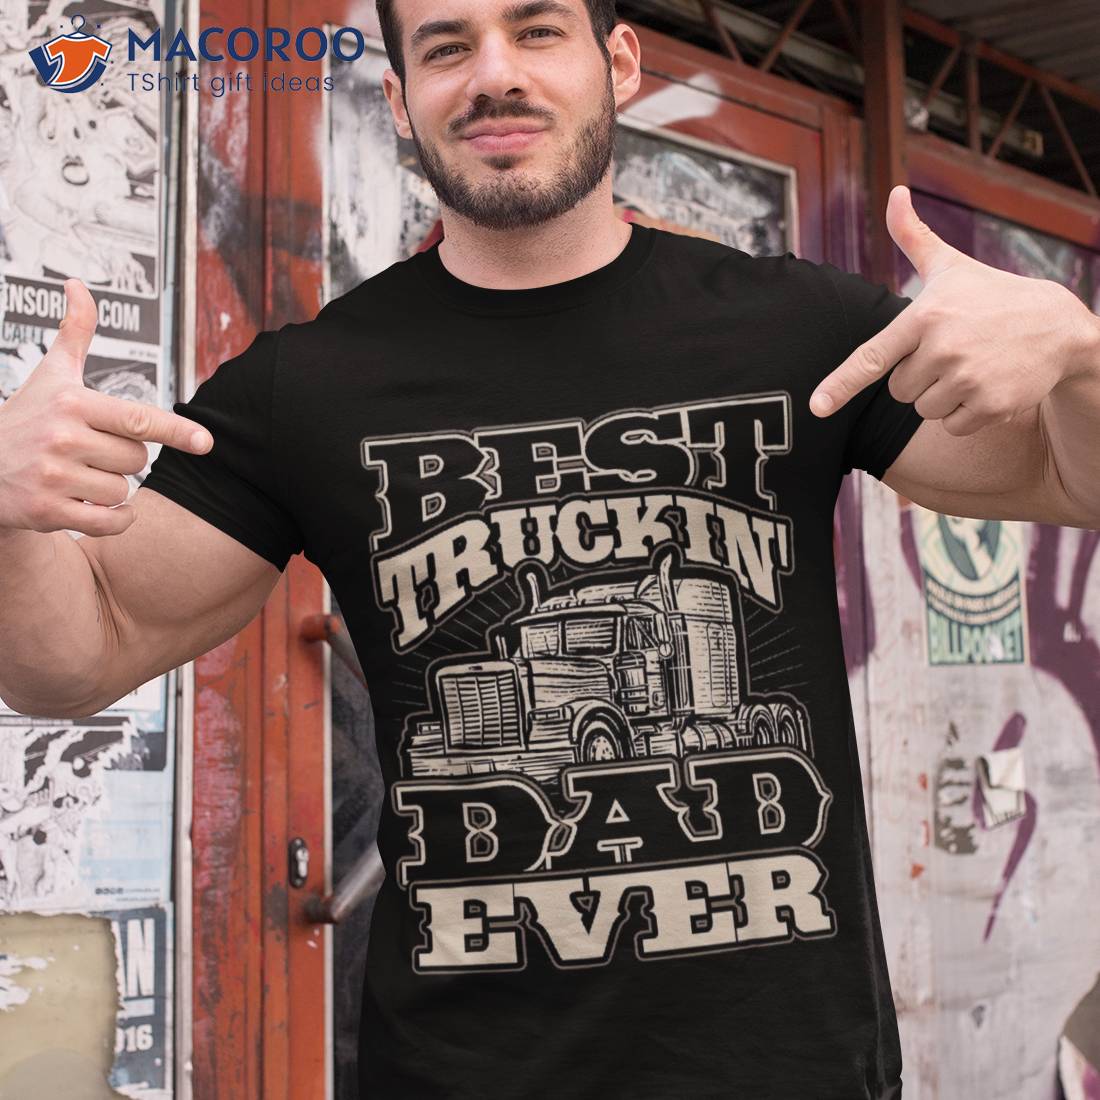 https://images.macoroo.com/wp-content/uploads/2023/06/truck-driver-best-trucking-dad-ever-trucker-fathers-day-shirt-tshirt-1.jpg